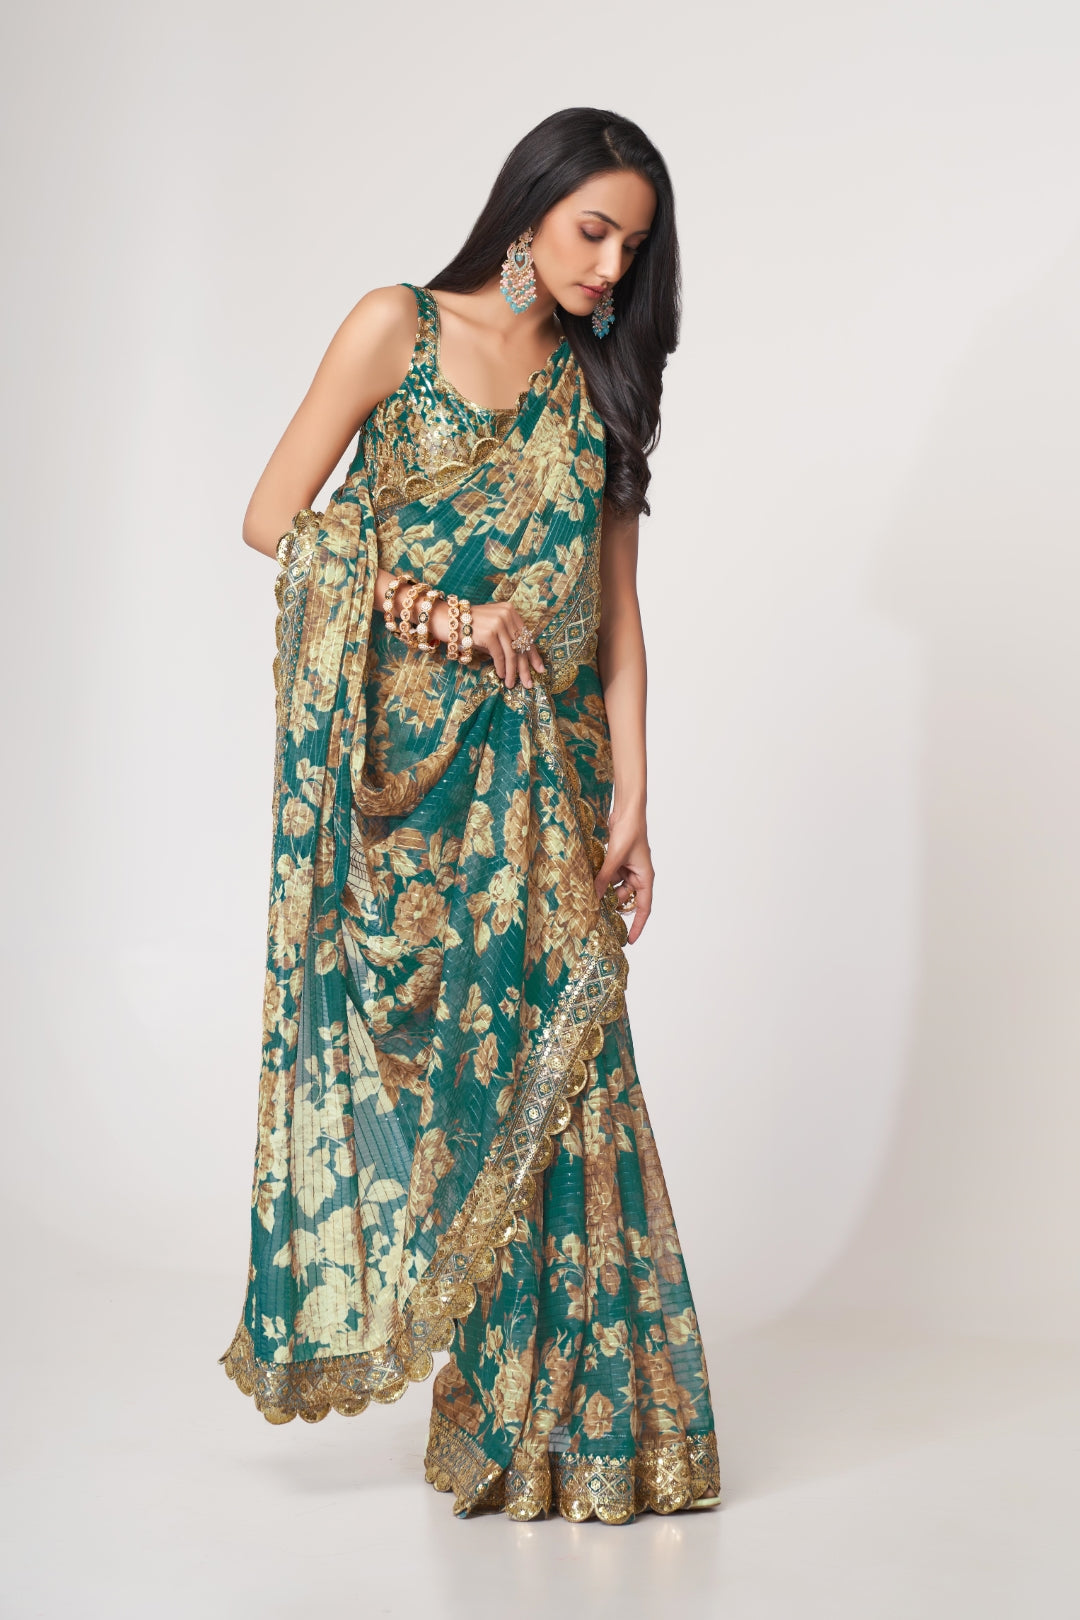 Teal Blue Organza Saree with Sequin Embroidery and Digital Print Colorful Saree